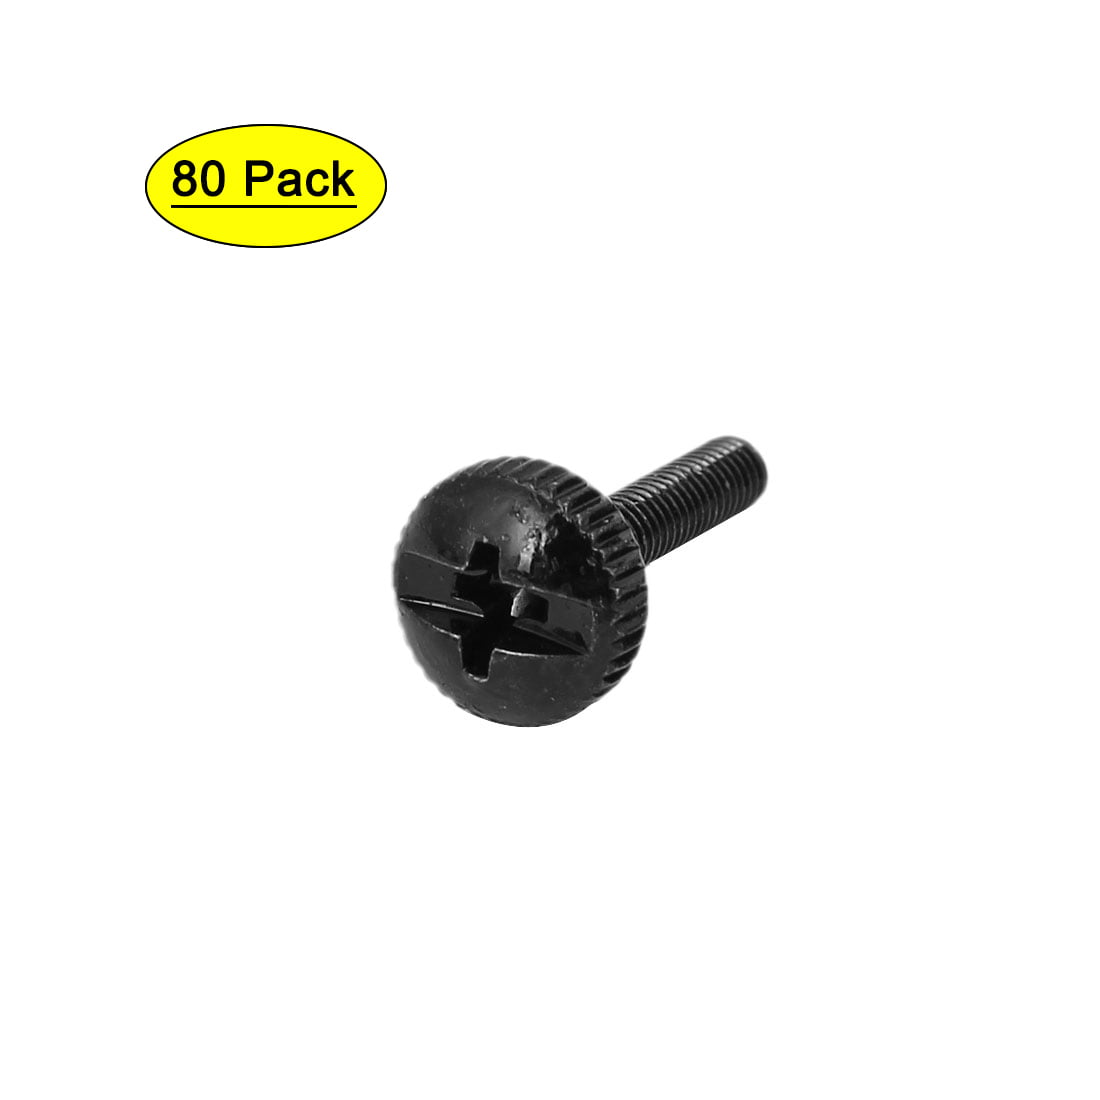 M3 x 12mm Knurled Phillips Head Thumb Screw Black 80pcs for Computer PC Case 